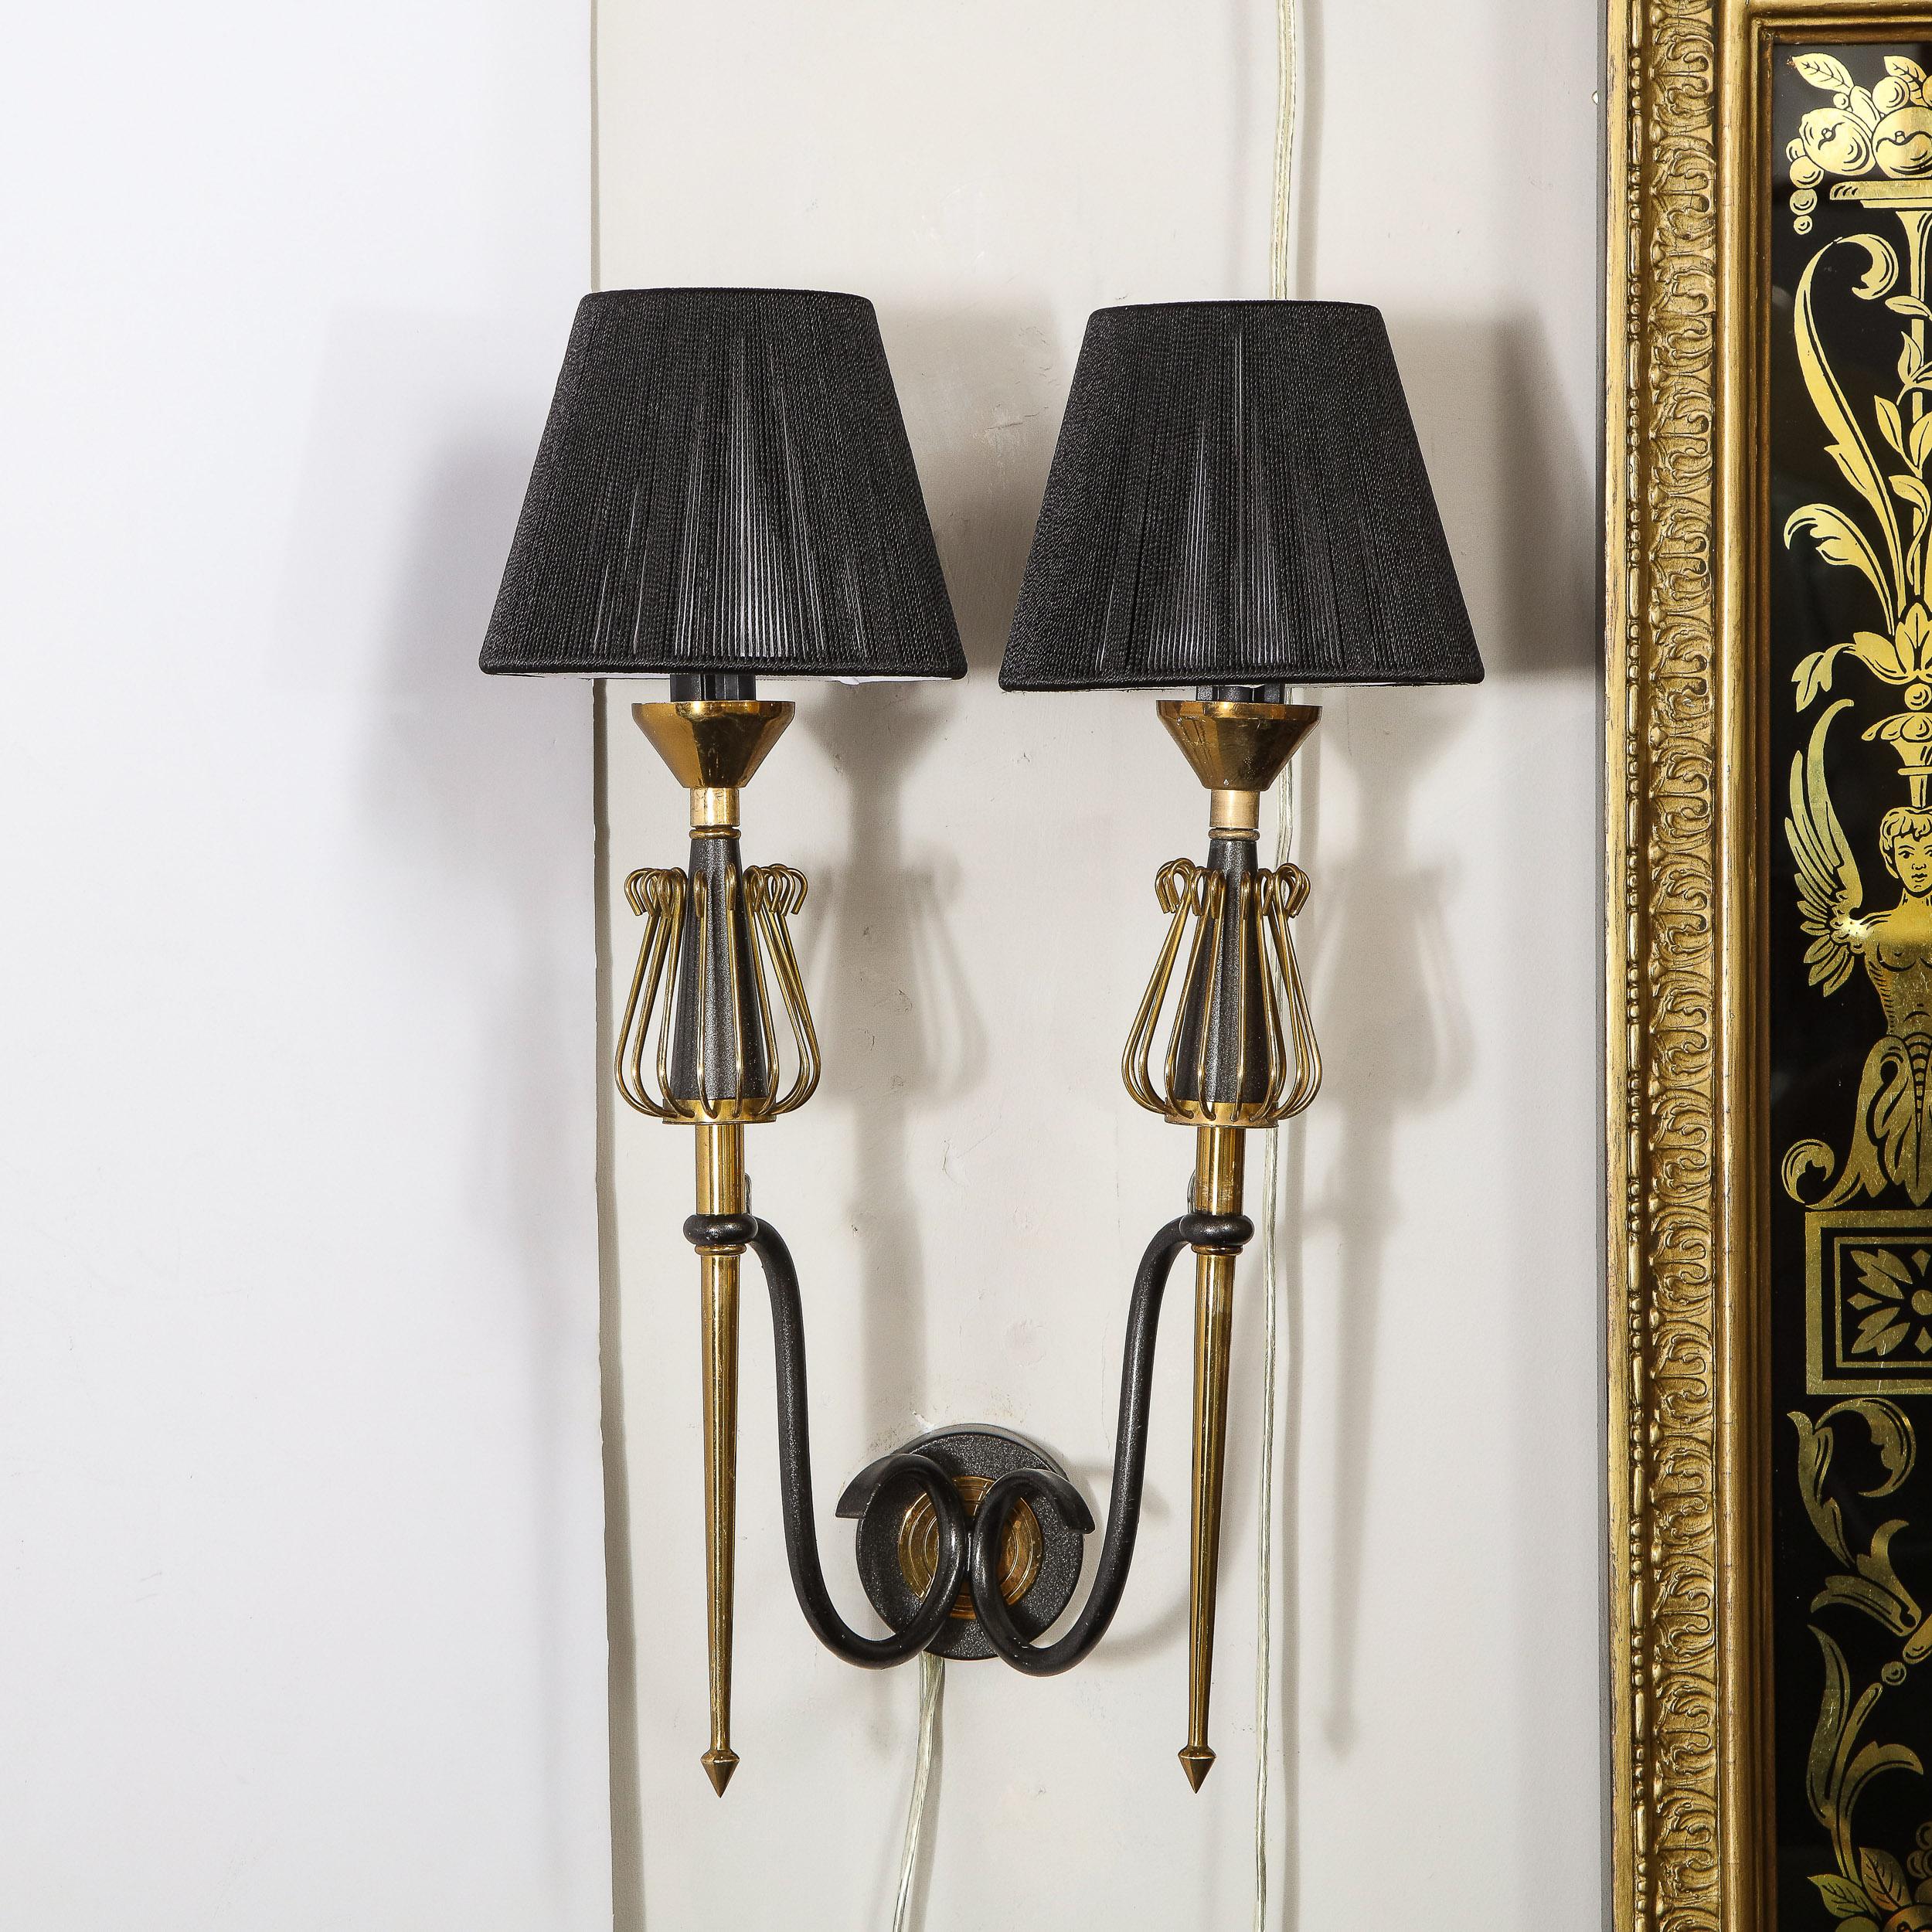 French Pair of Mid-Century Modern Brass & Black Enamel Sconces w/ Curvilinear Detailing For Sale